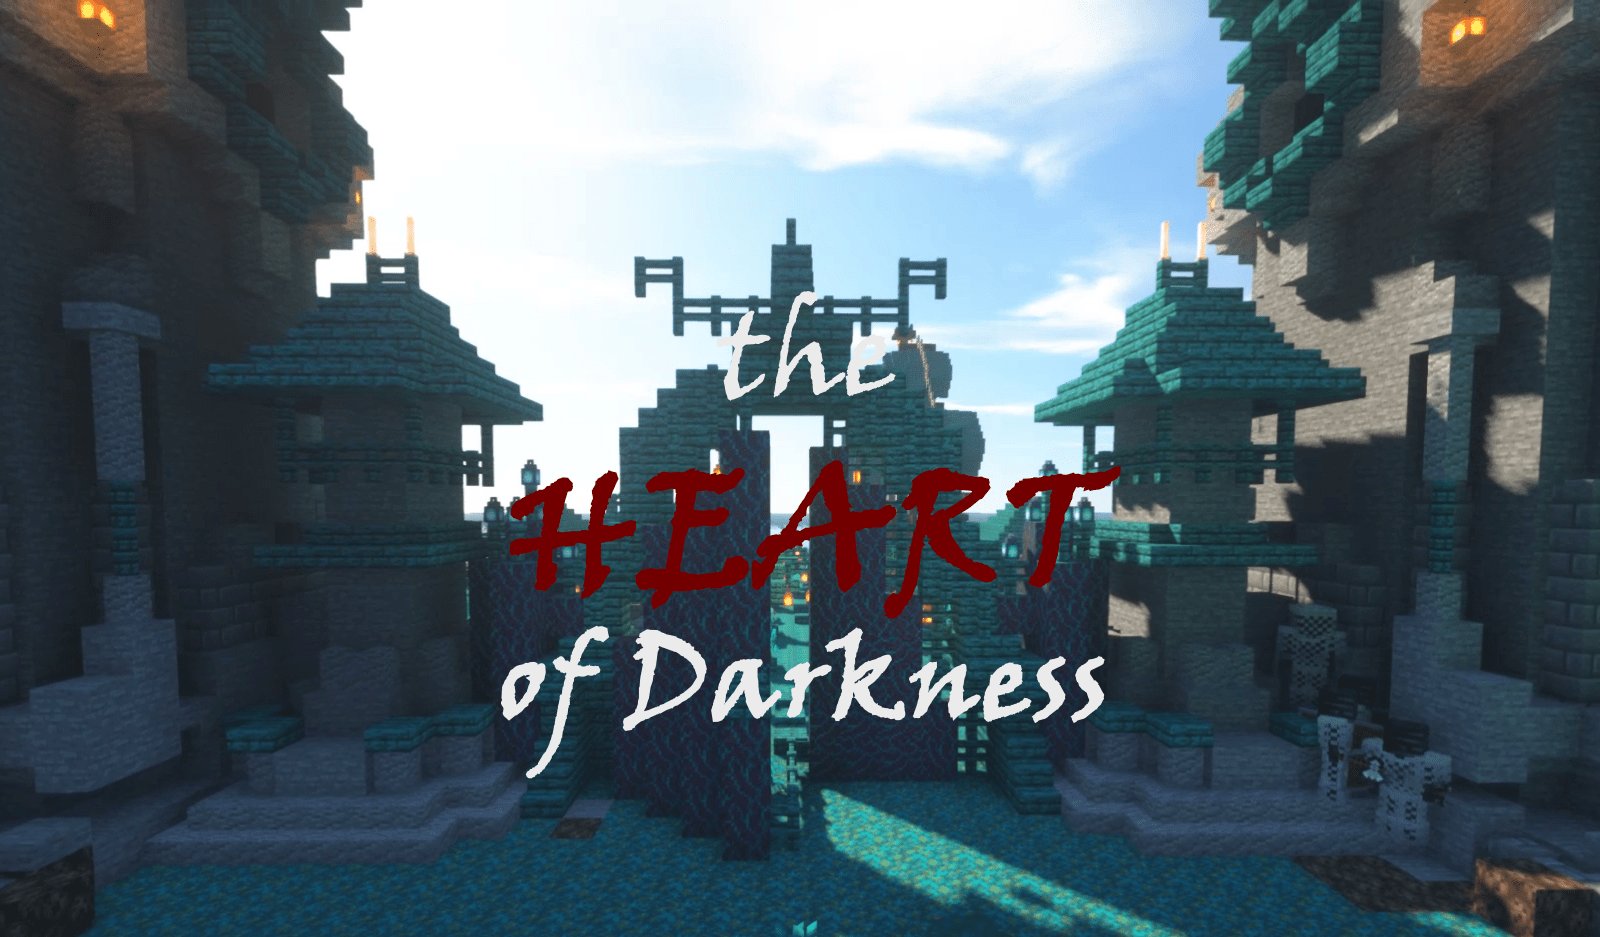 Télécharger Heart of Darkness pour Minecraft 1.16.5